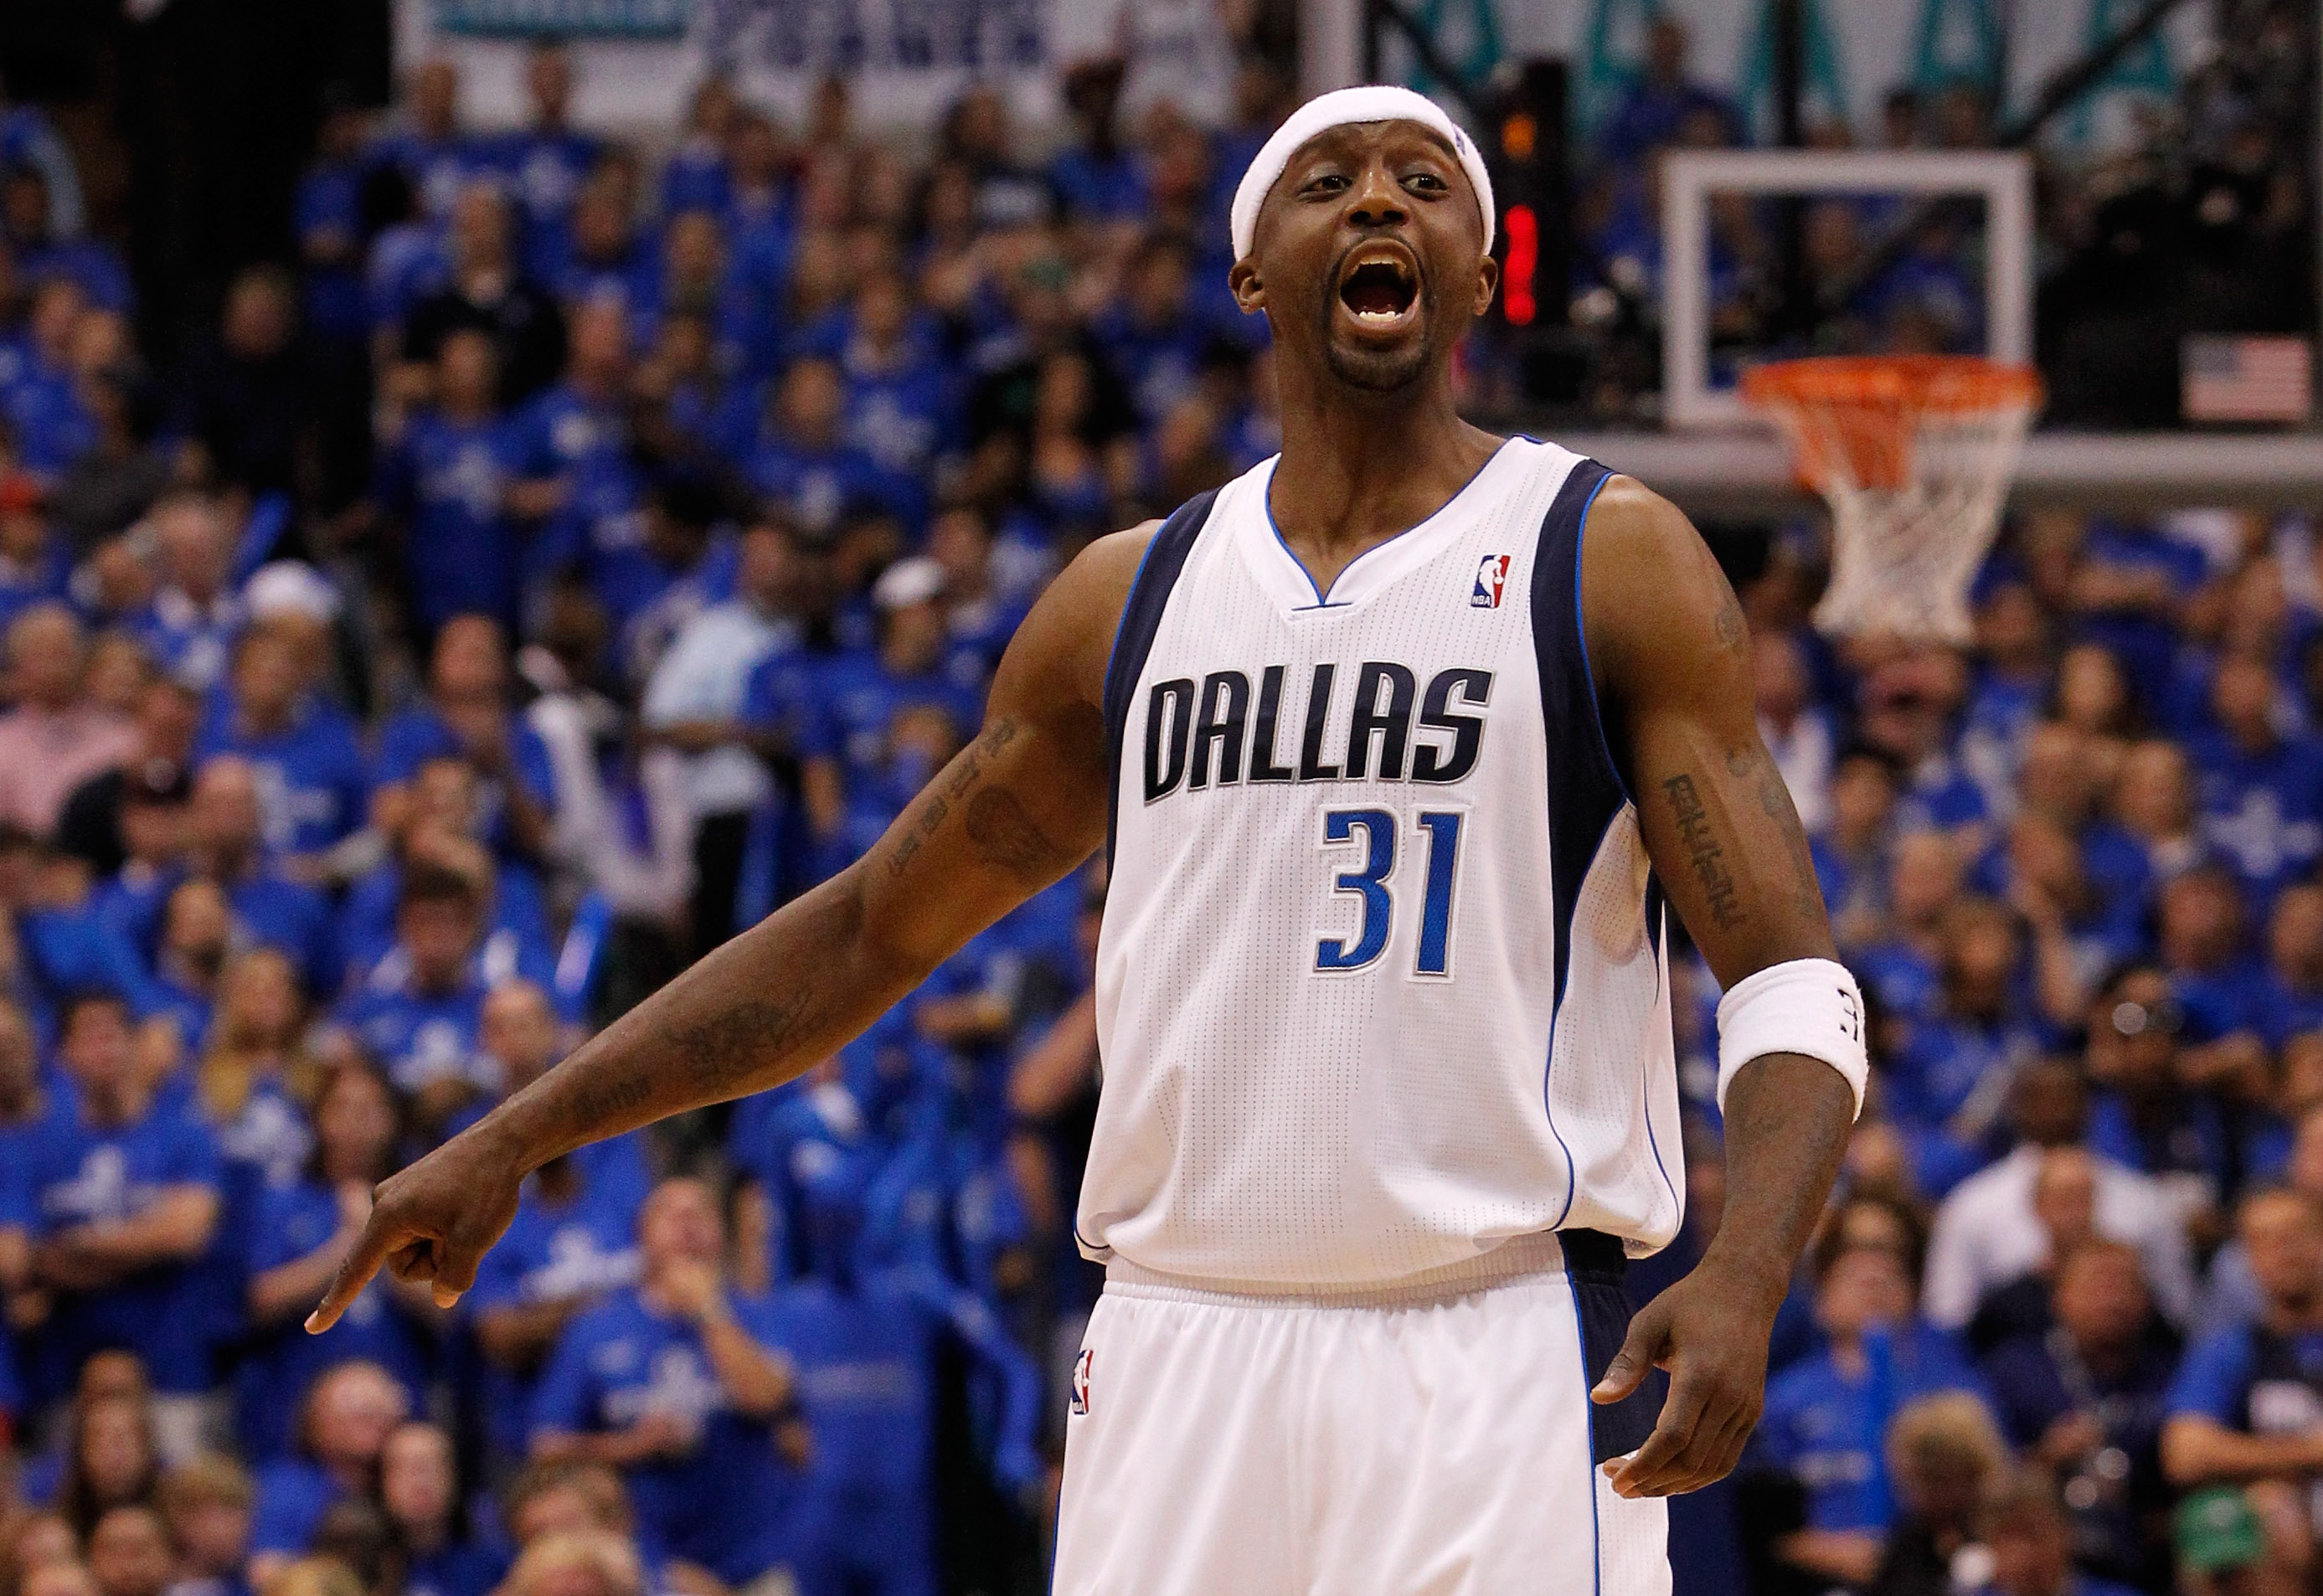 NBA Buzz on X: On this date, June 12, in 2011, the Dallas